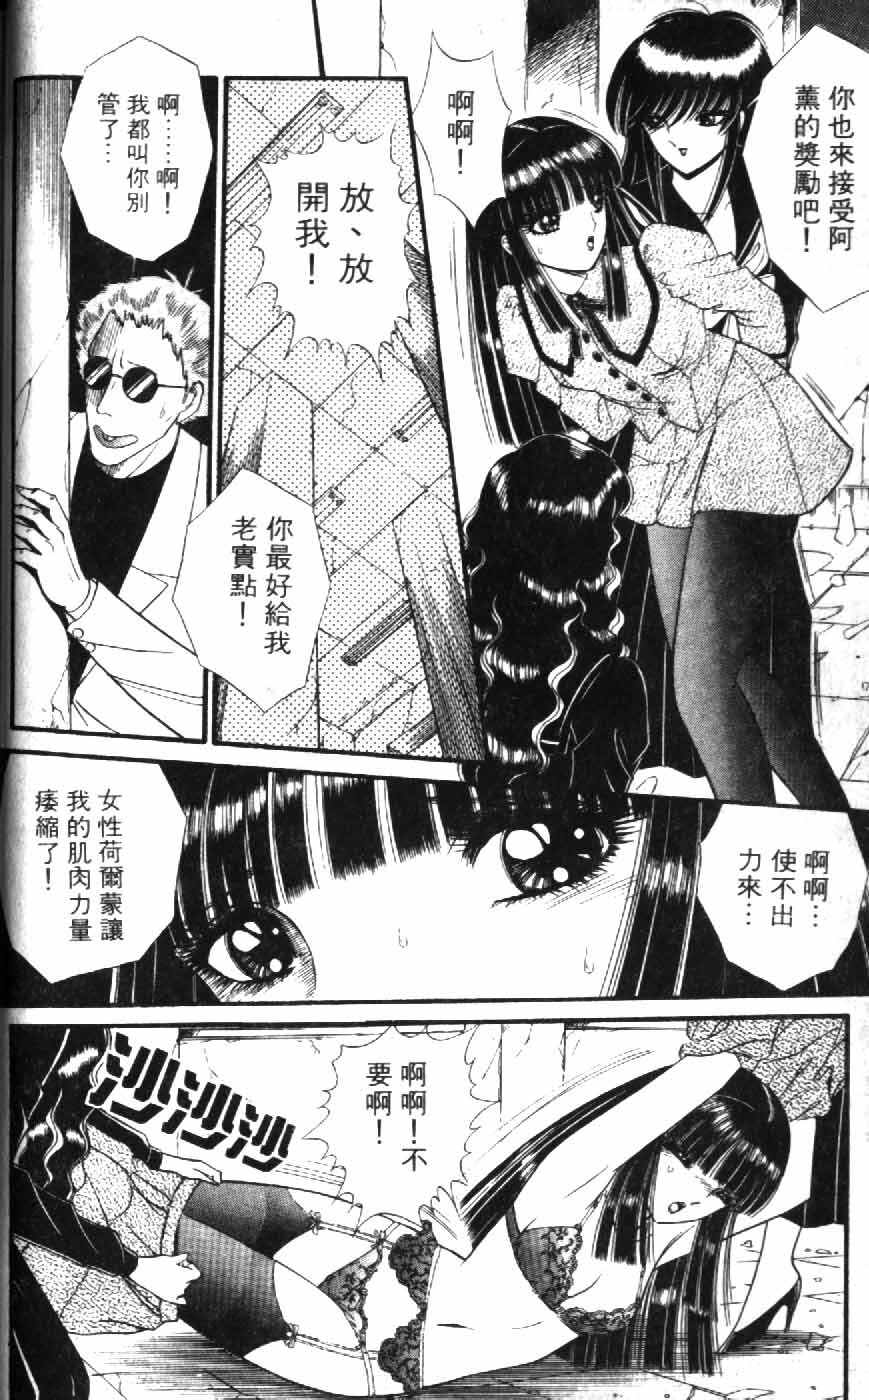 [Senno Knife] Ouma ga Horror Show 1 - Trans Sexual Special Show 1 | 顫慄博覽會 1 [Chinese] page 36 full